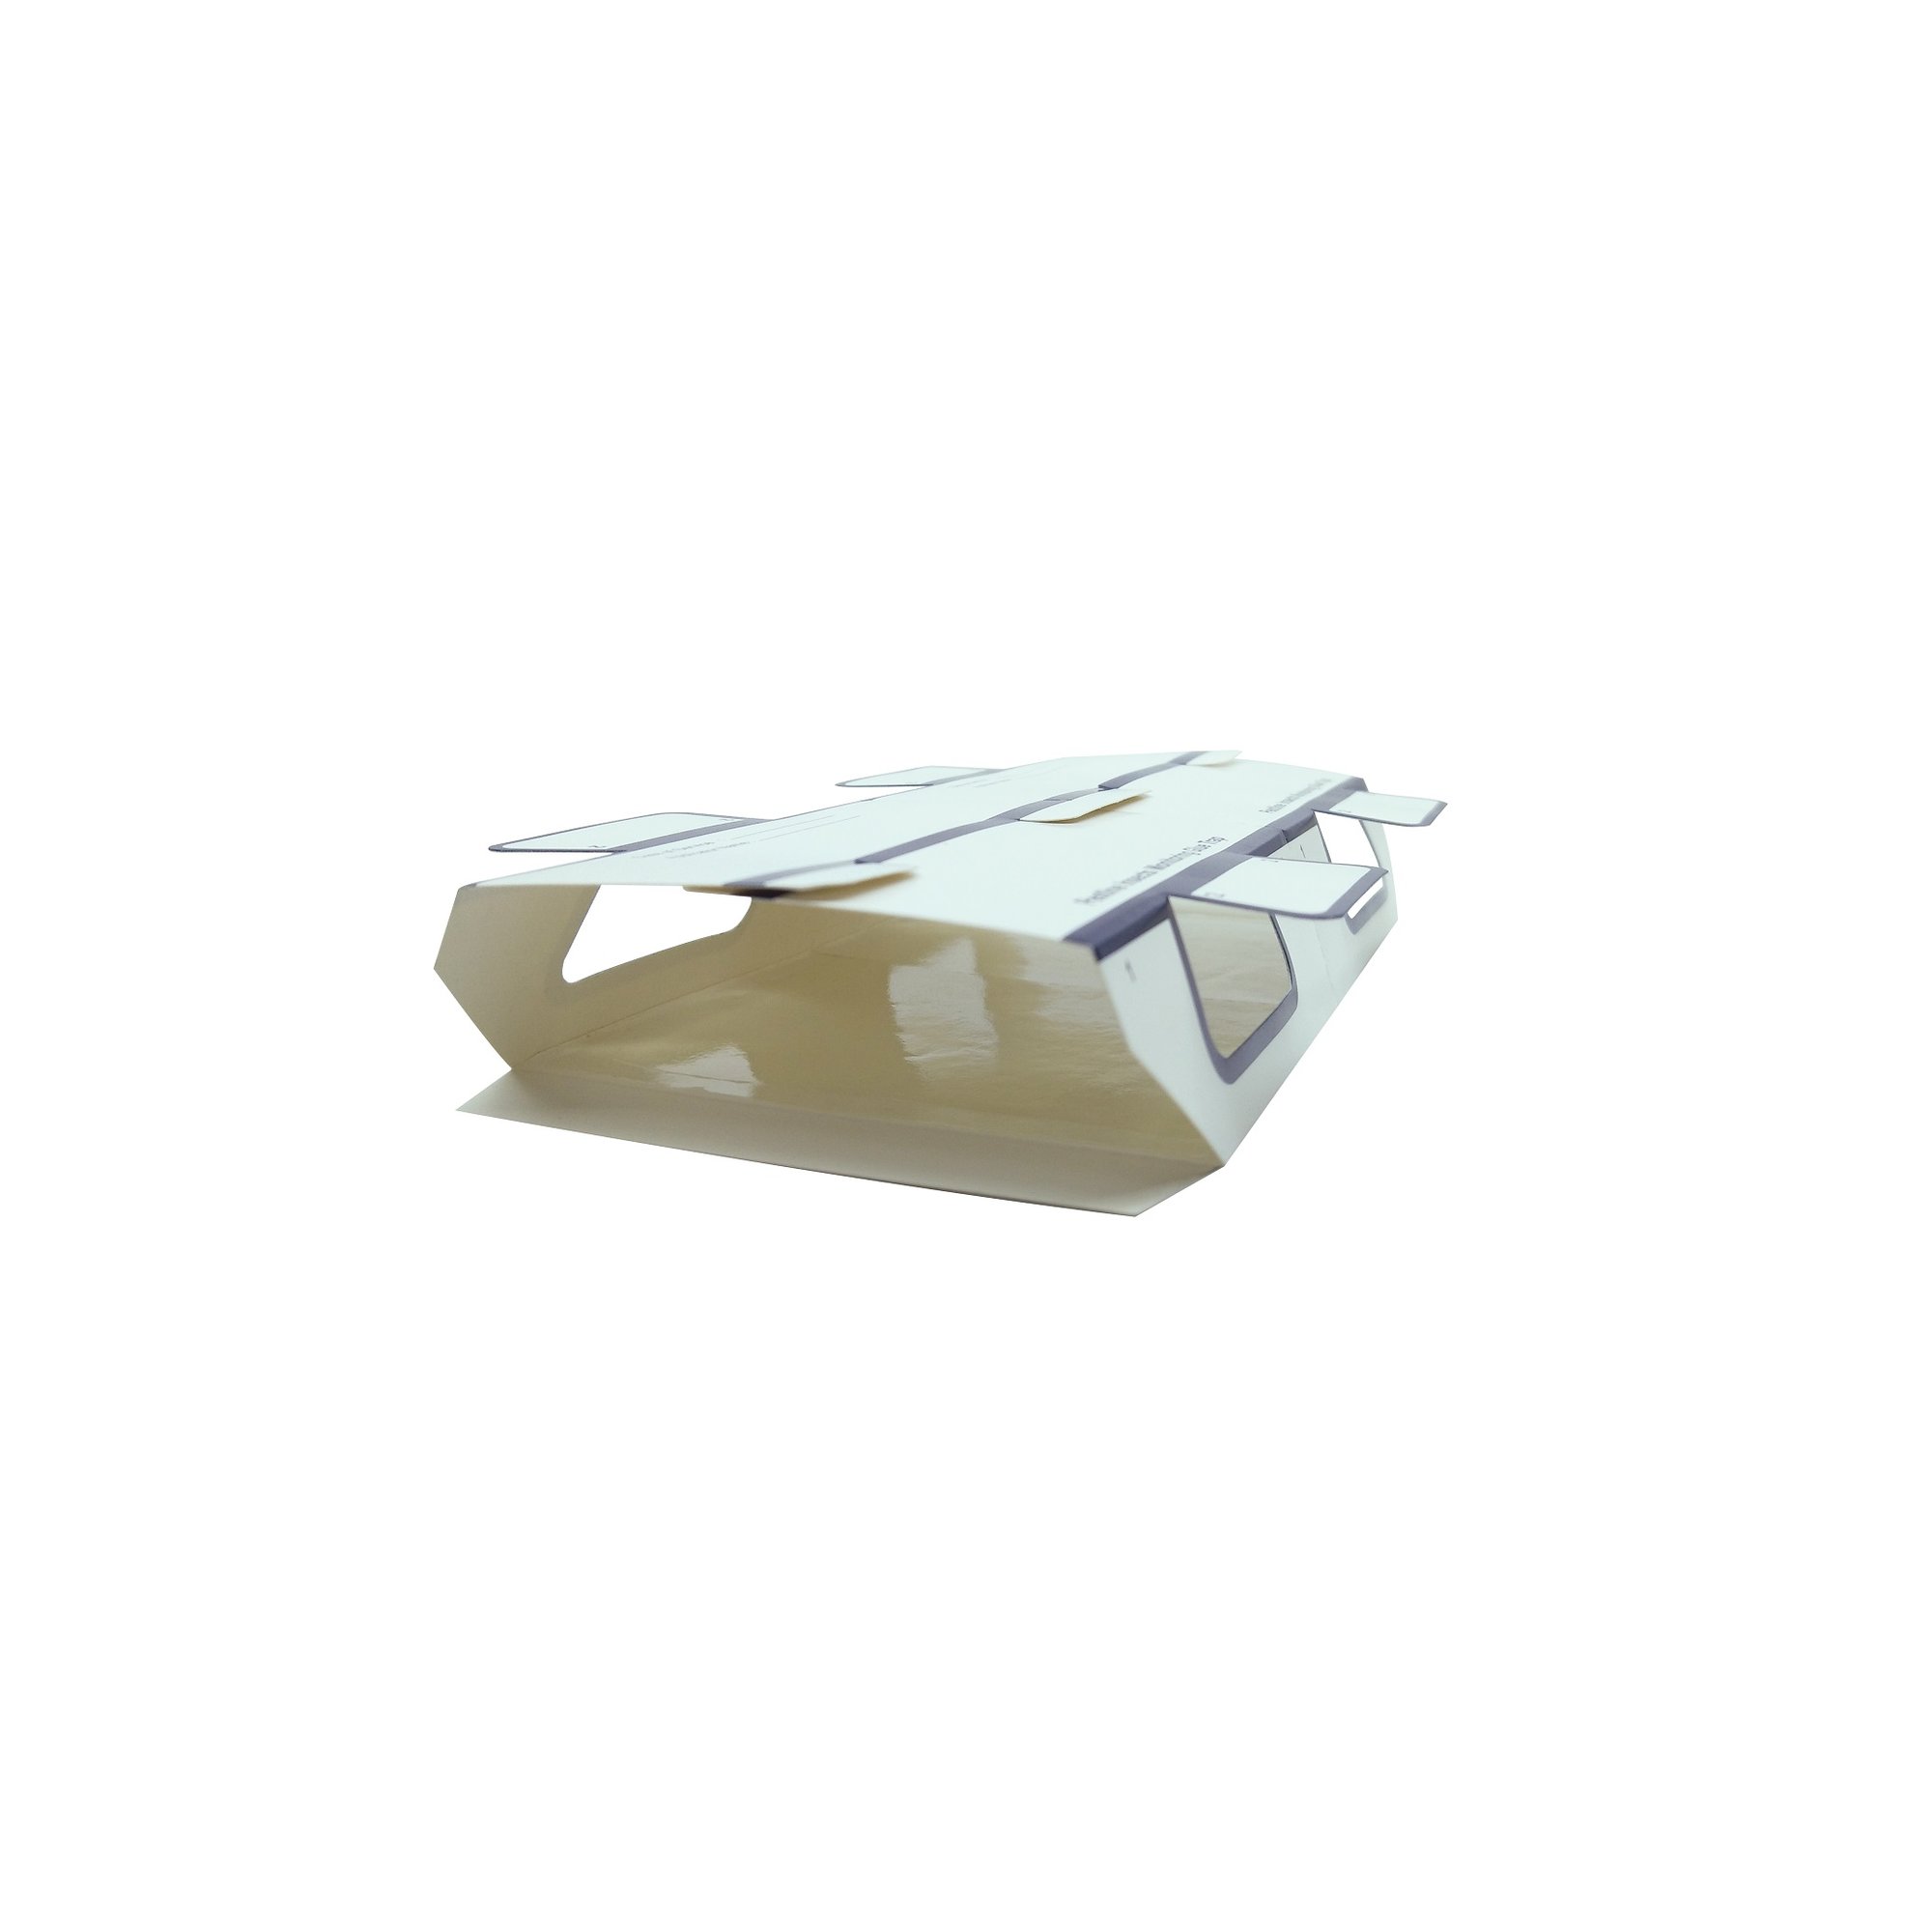 Insect Monitoring Glue Trap 240